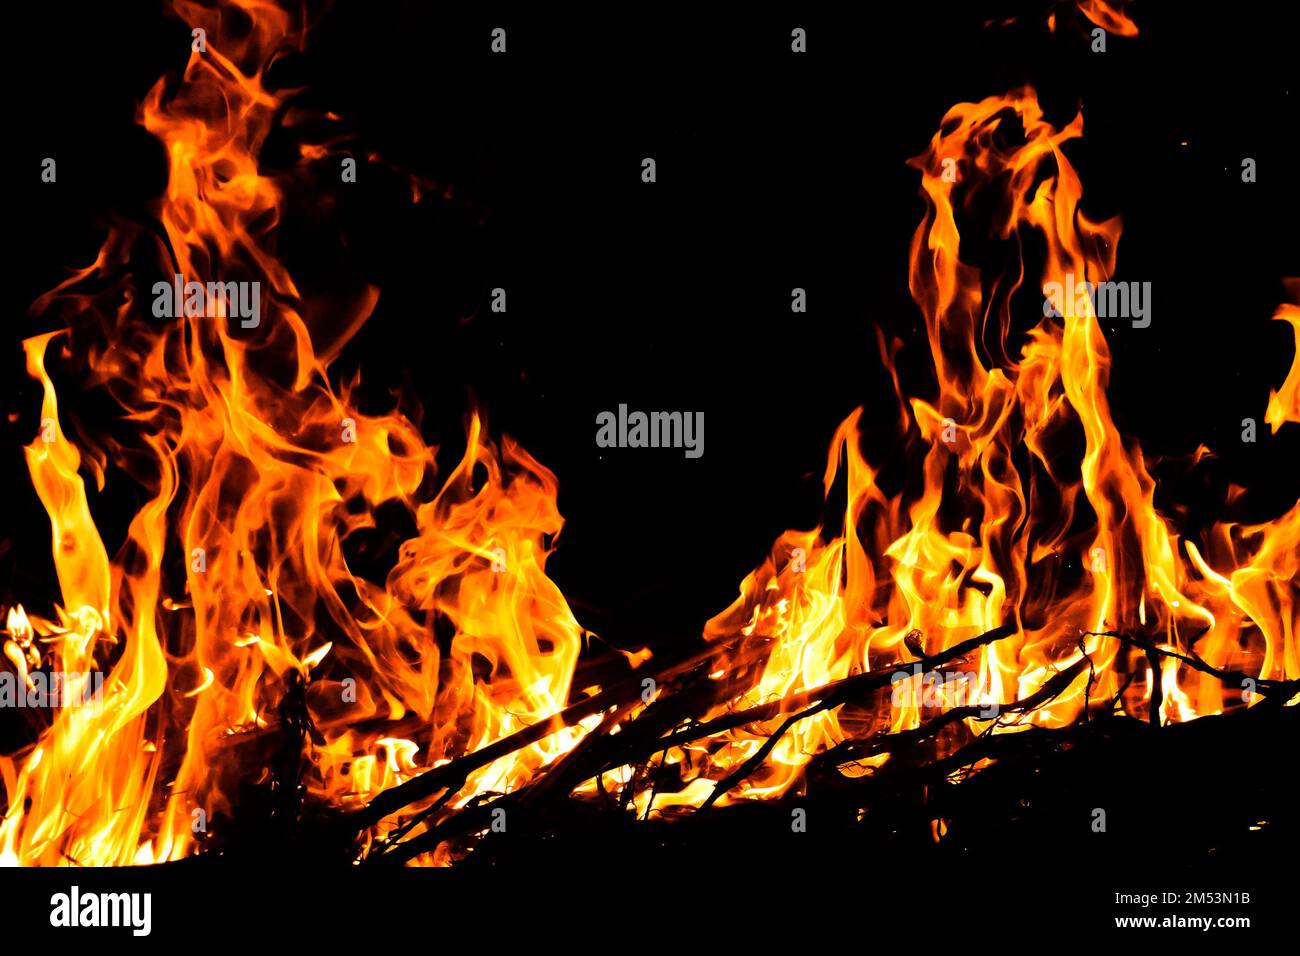 Fire sparks isolated on black background Stock Photo